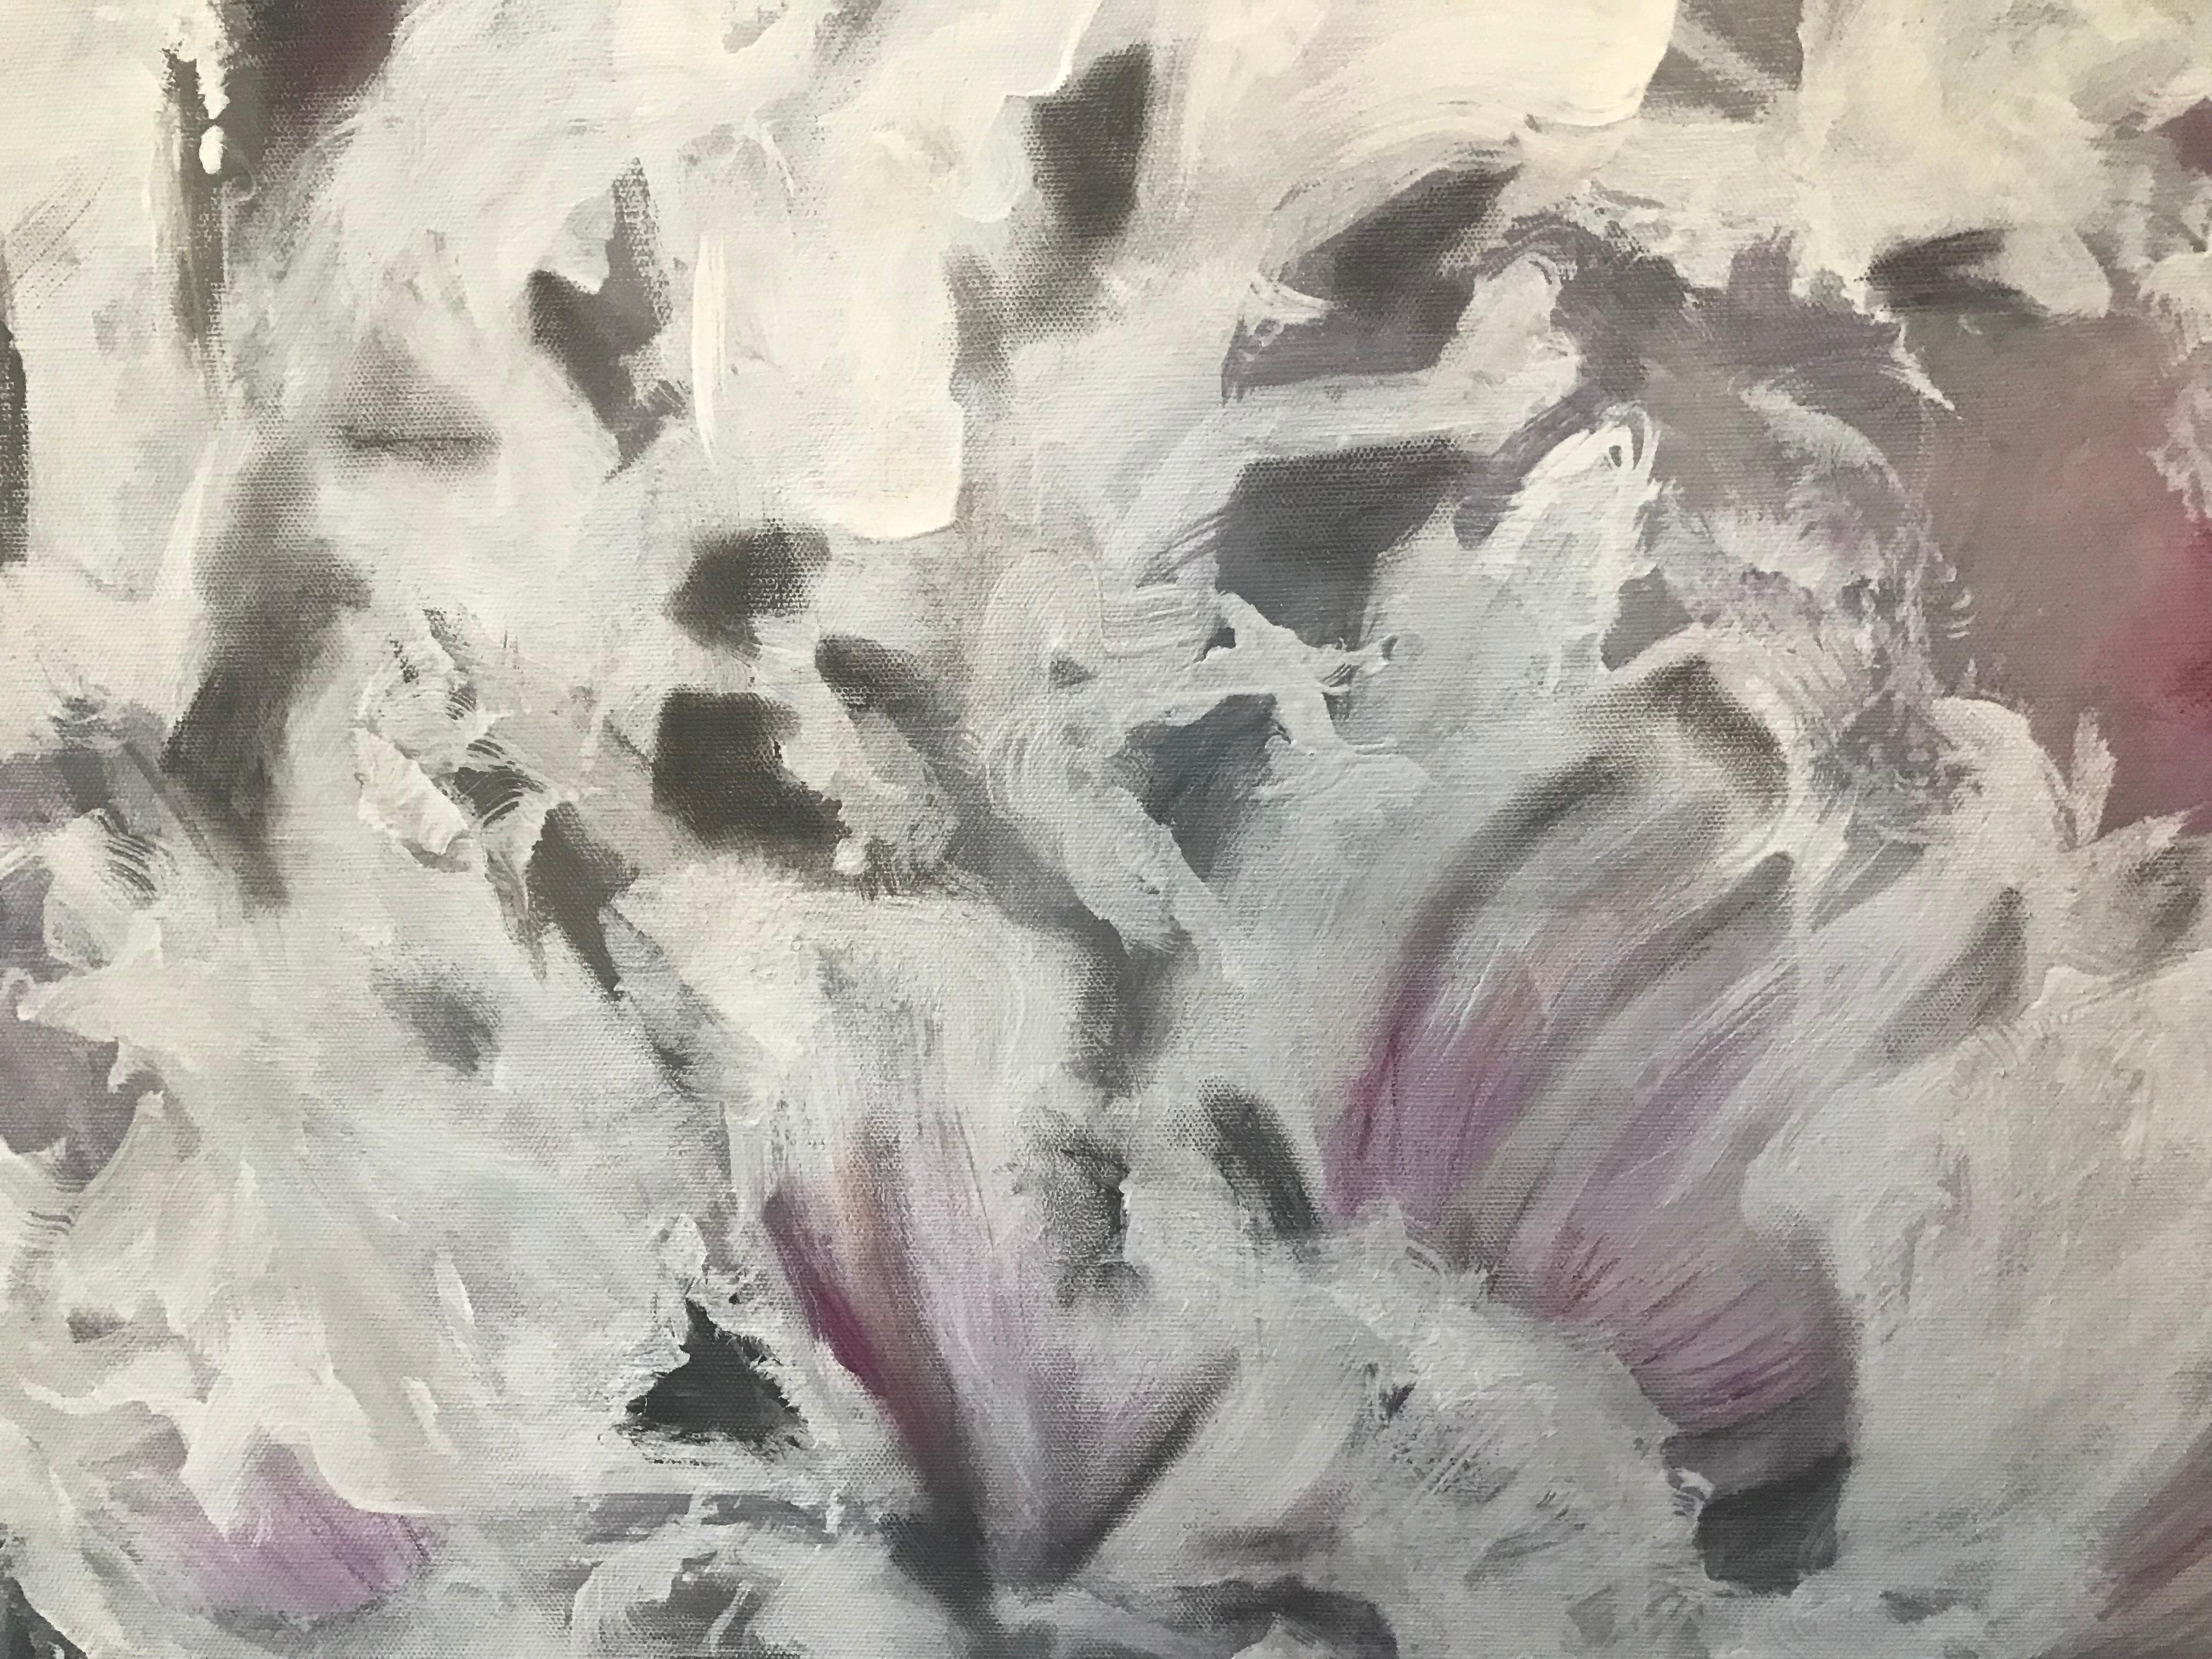 <p>Artist Comments<br>Each year, DL Watson travels from her home in Ft. Lauderdale, Florida to central Oregon to spend the summer. This painting was inspired by the peonies blooming in her garden when she arrives in Oregon.</p><br/><p>About the